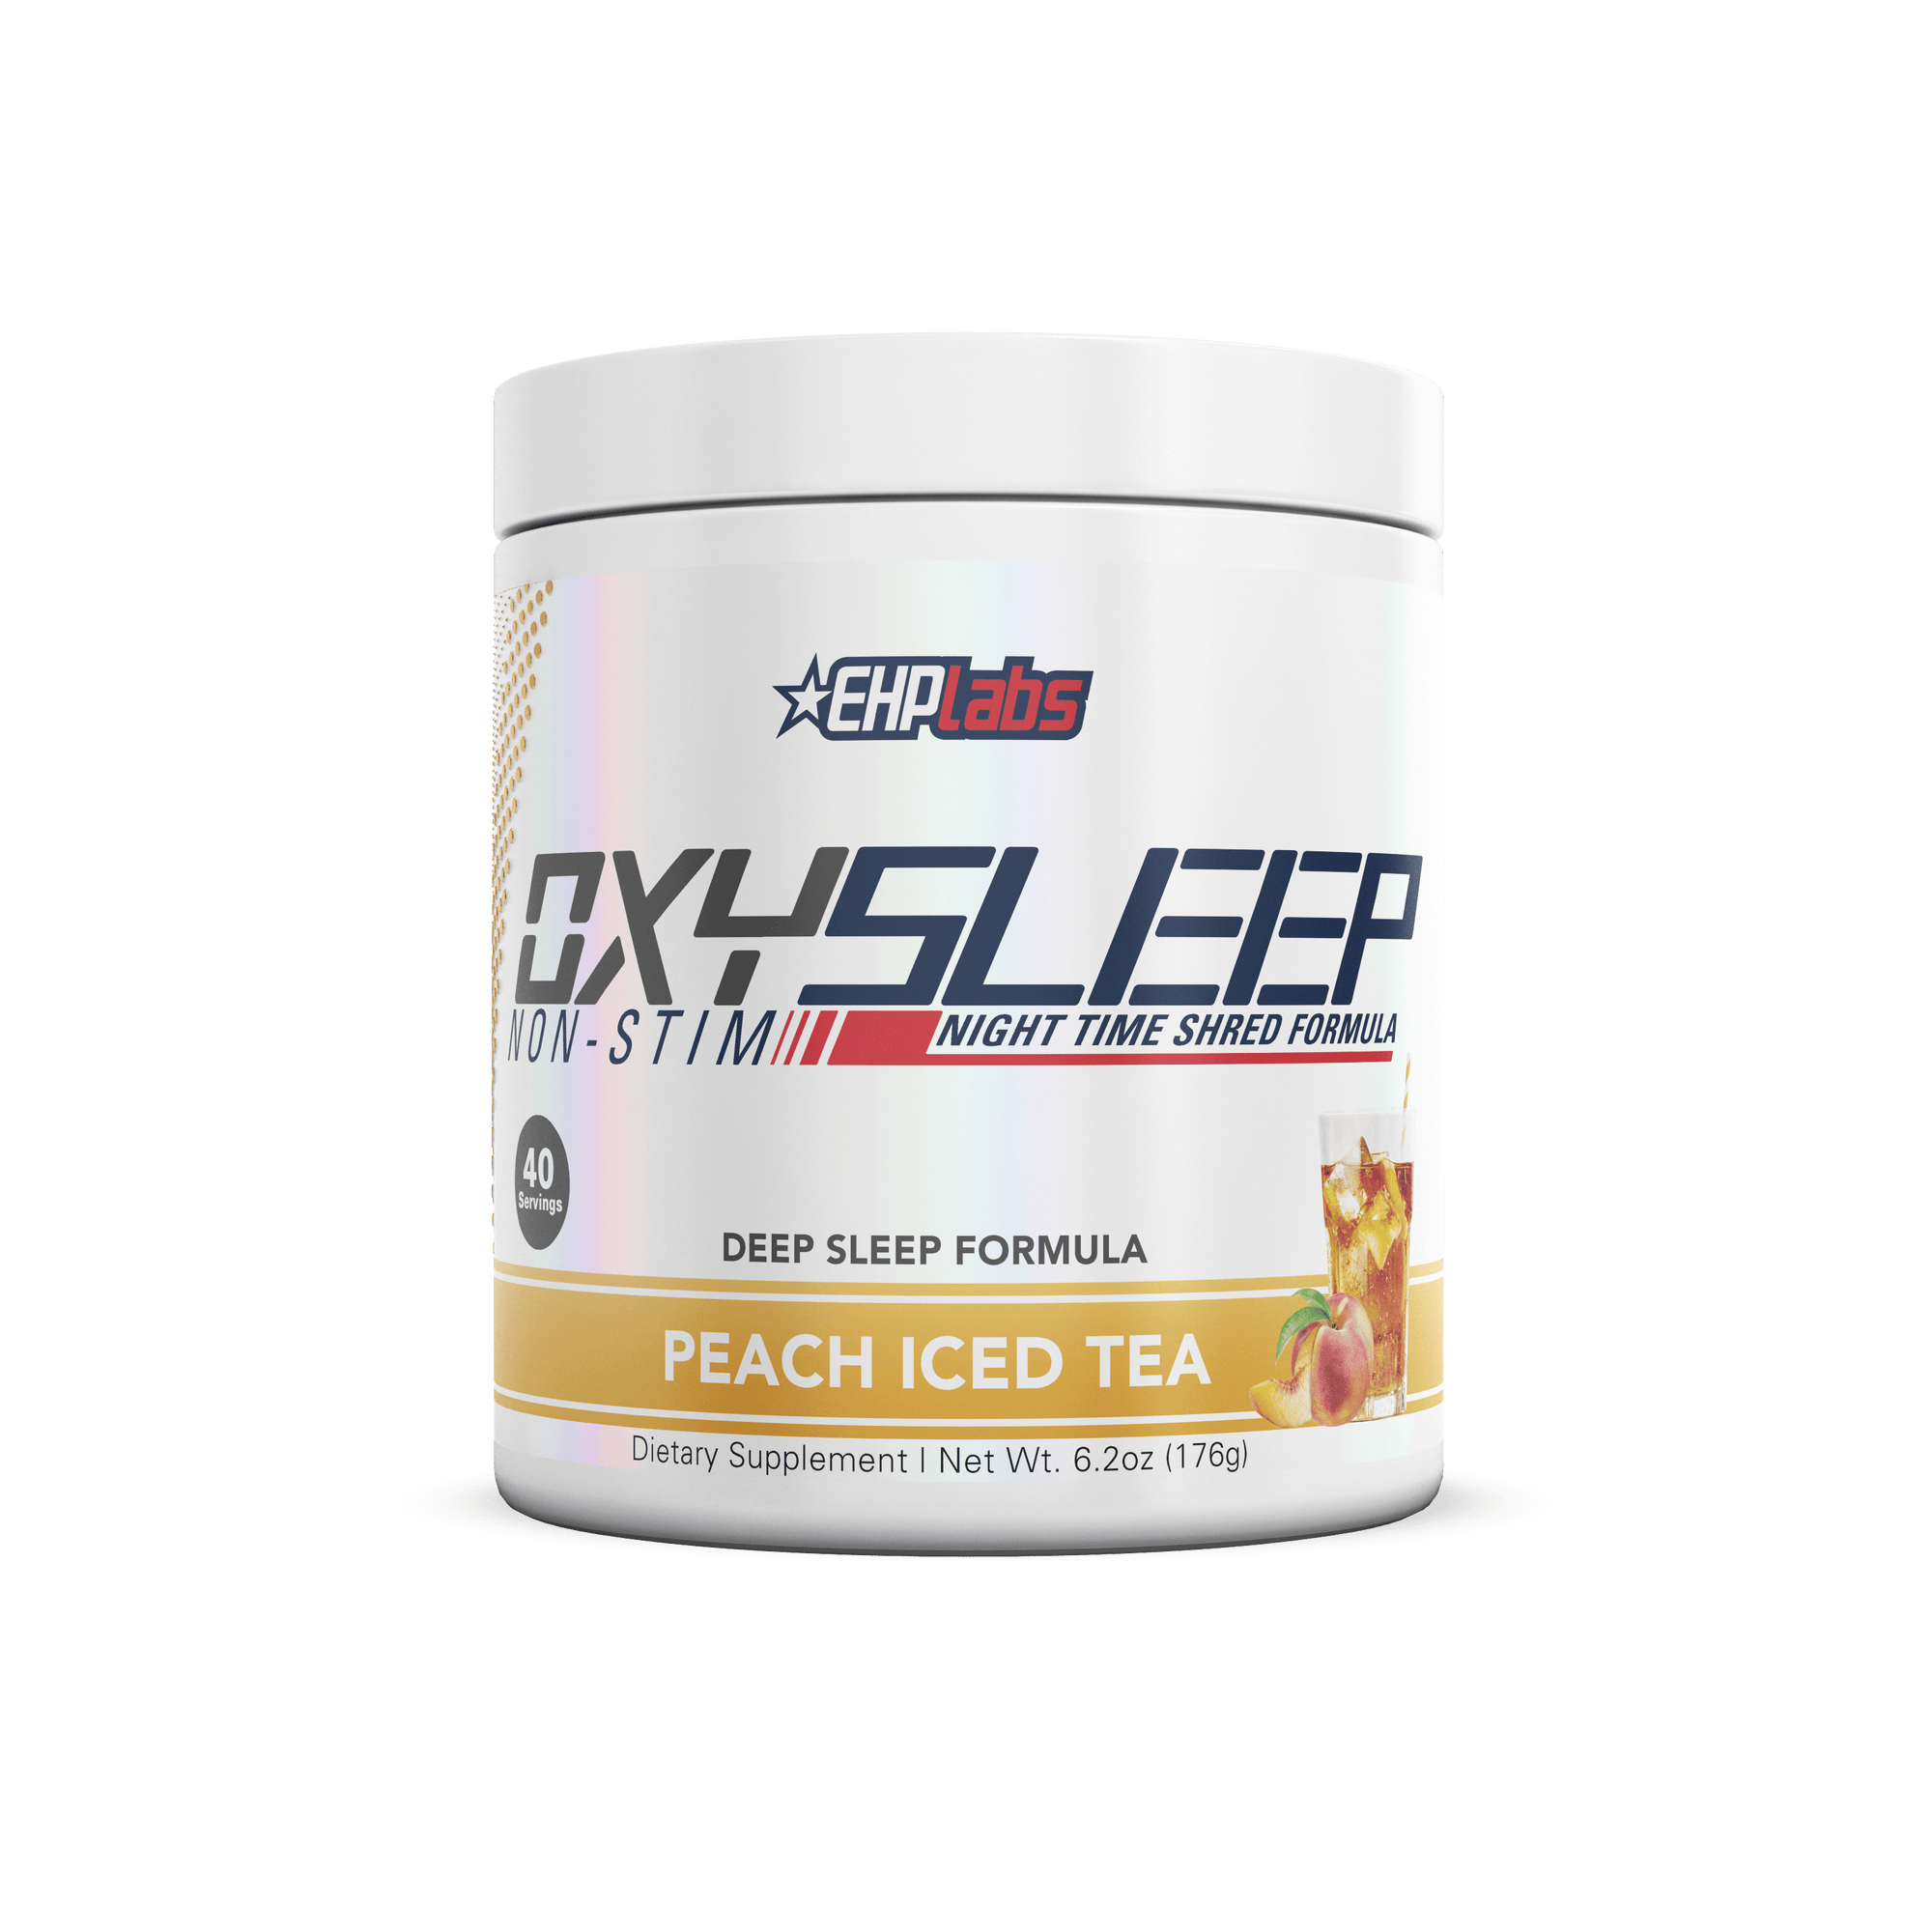 Fitness Hero presents, OxySleep by EHP Labs a non-stimulant night time supplement that has been scientifically formulated using ingredients which have shown to not only increase the quality of sleep, but also promote post-training recovery, fat loss and muscle gain. It comes in 3 delicious flavour.